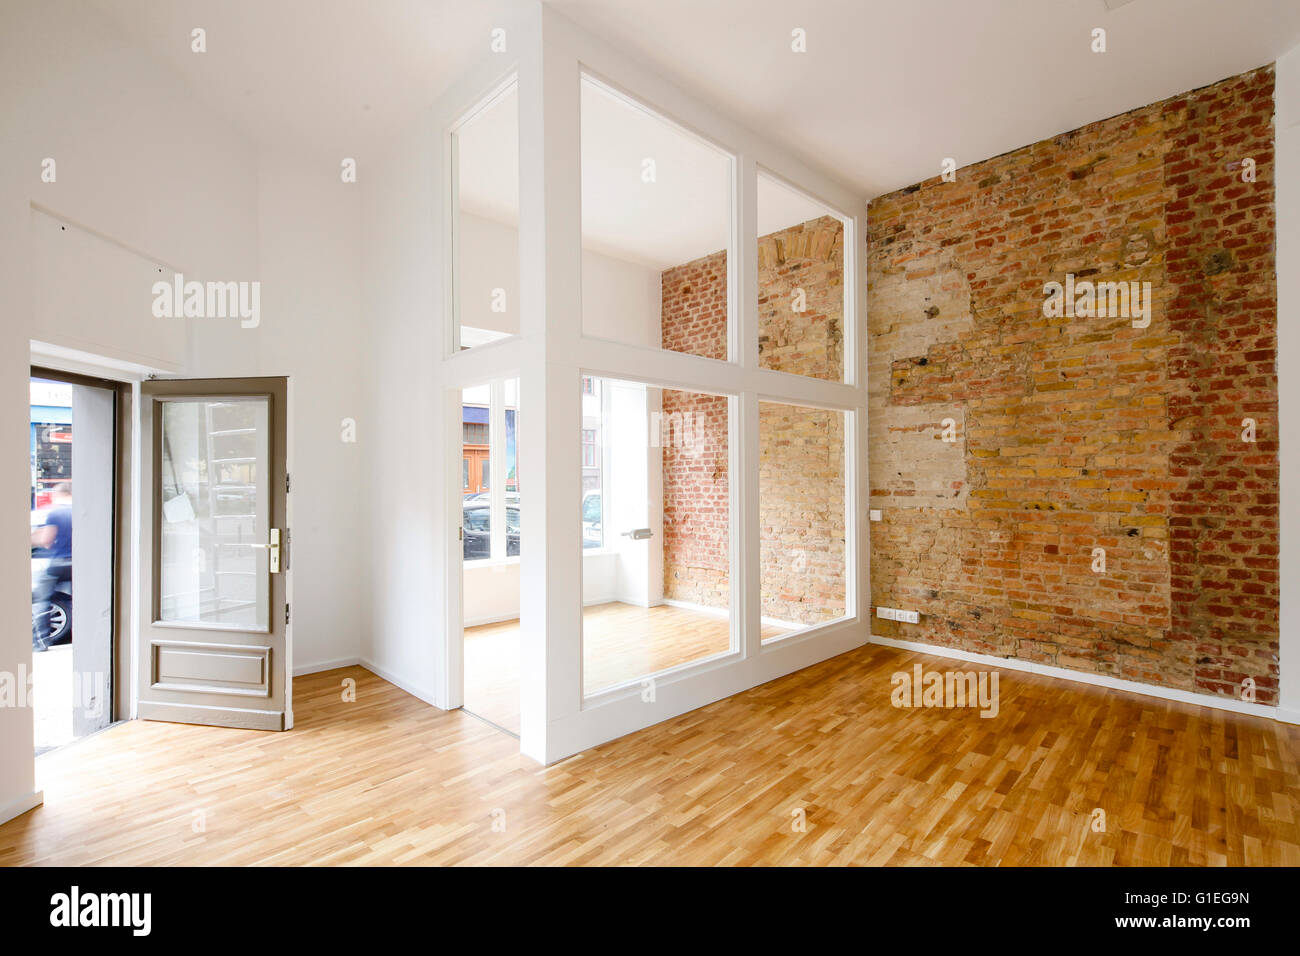 Buro, 53 Reichenberger Strasse. Spacious room with modern layout and exposed brick wall. Open front door with glass partition. Stock Photo